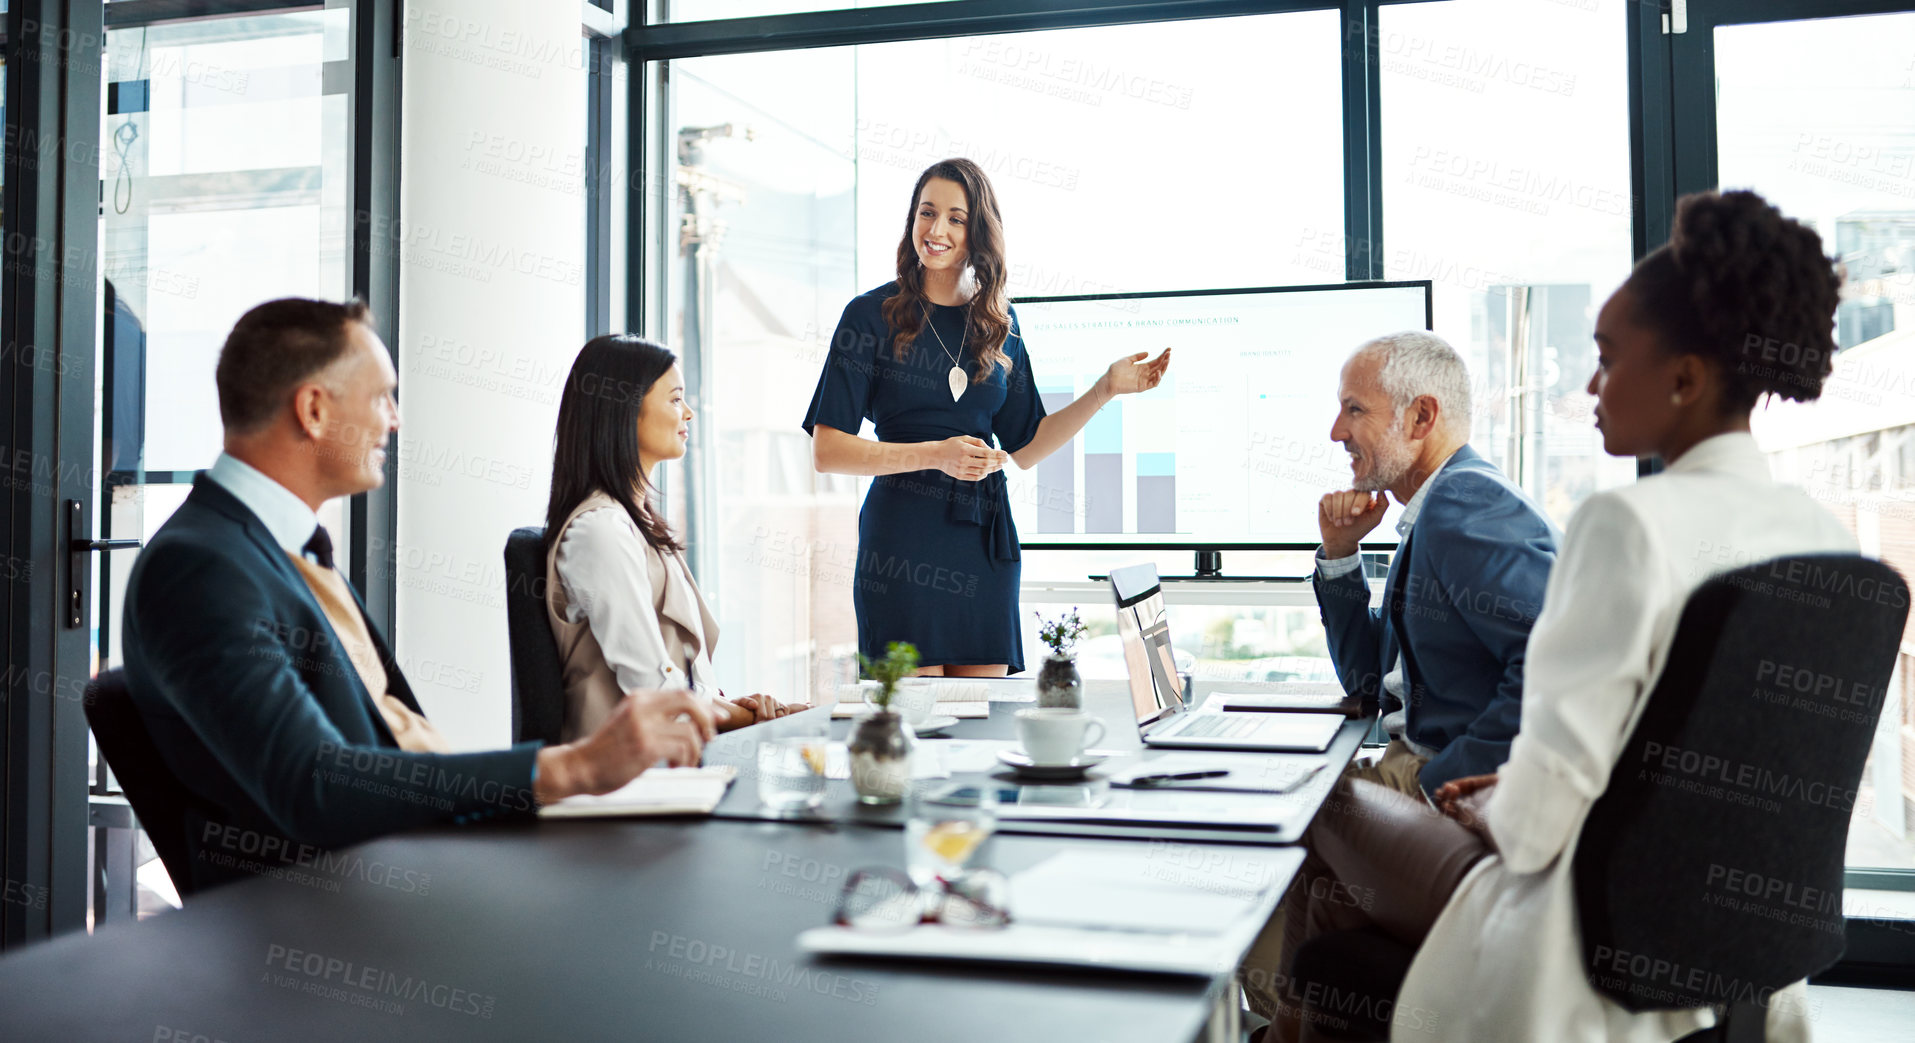 Buy stock photo Business woman speaker in an investment meeting with financial data on a boardroom screen. International executive team listening to a presentation. Finance worker talking at a partnership proposal